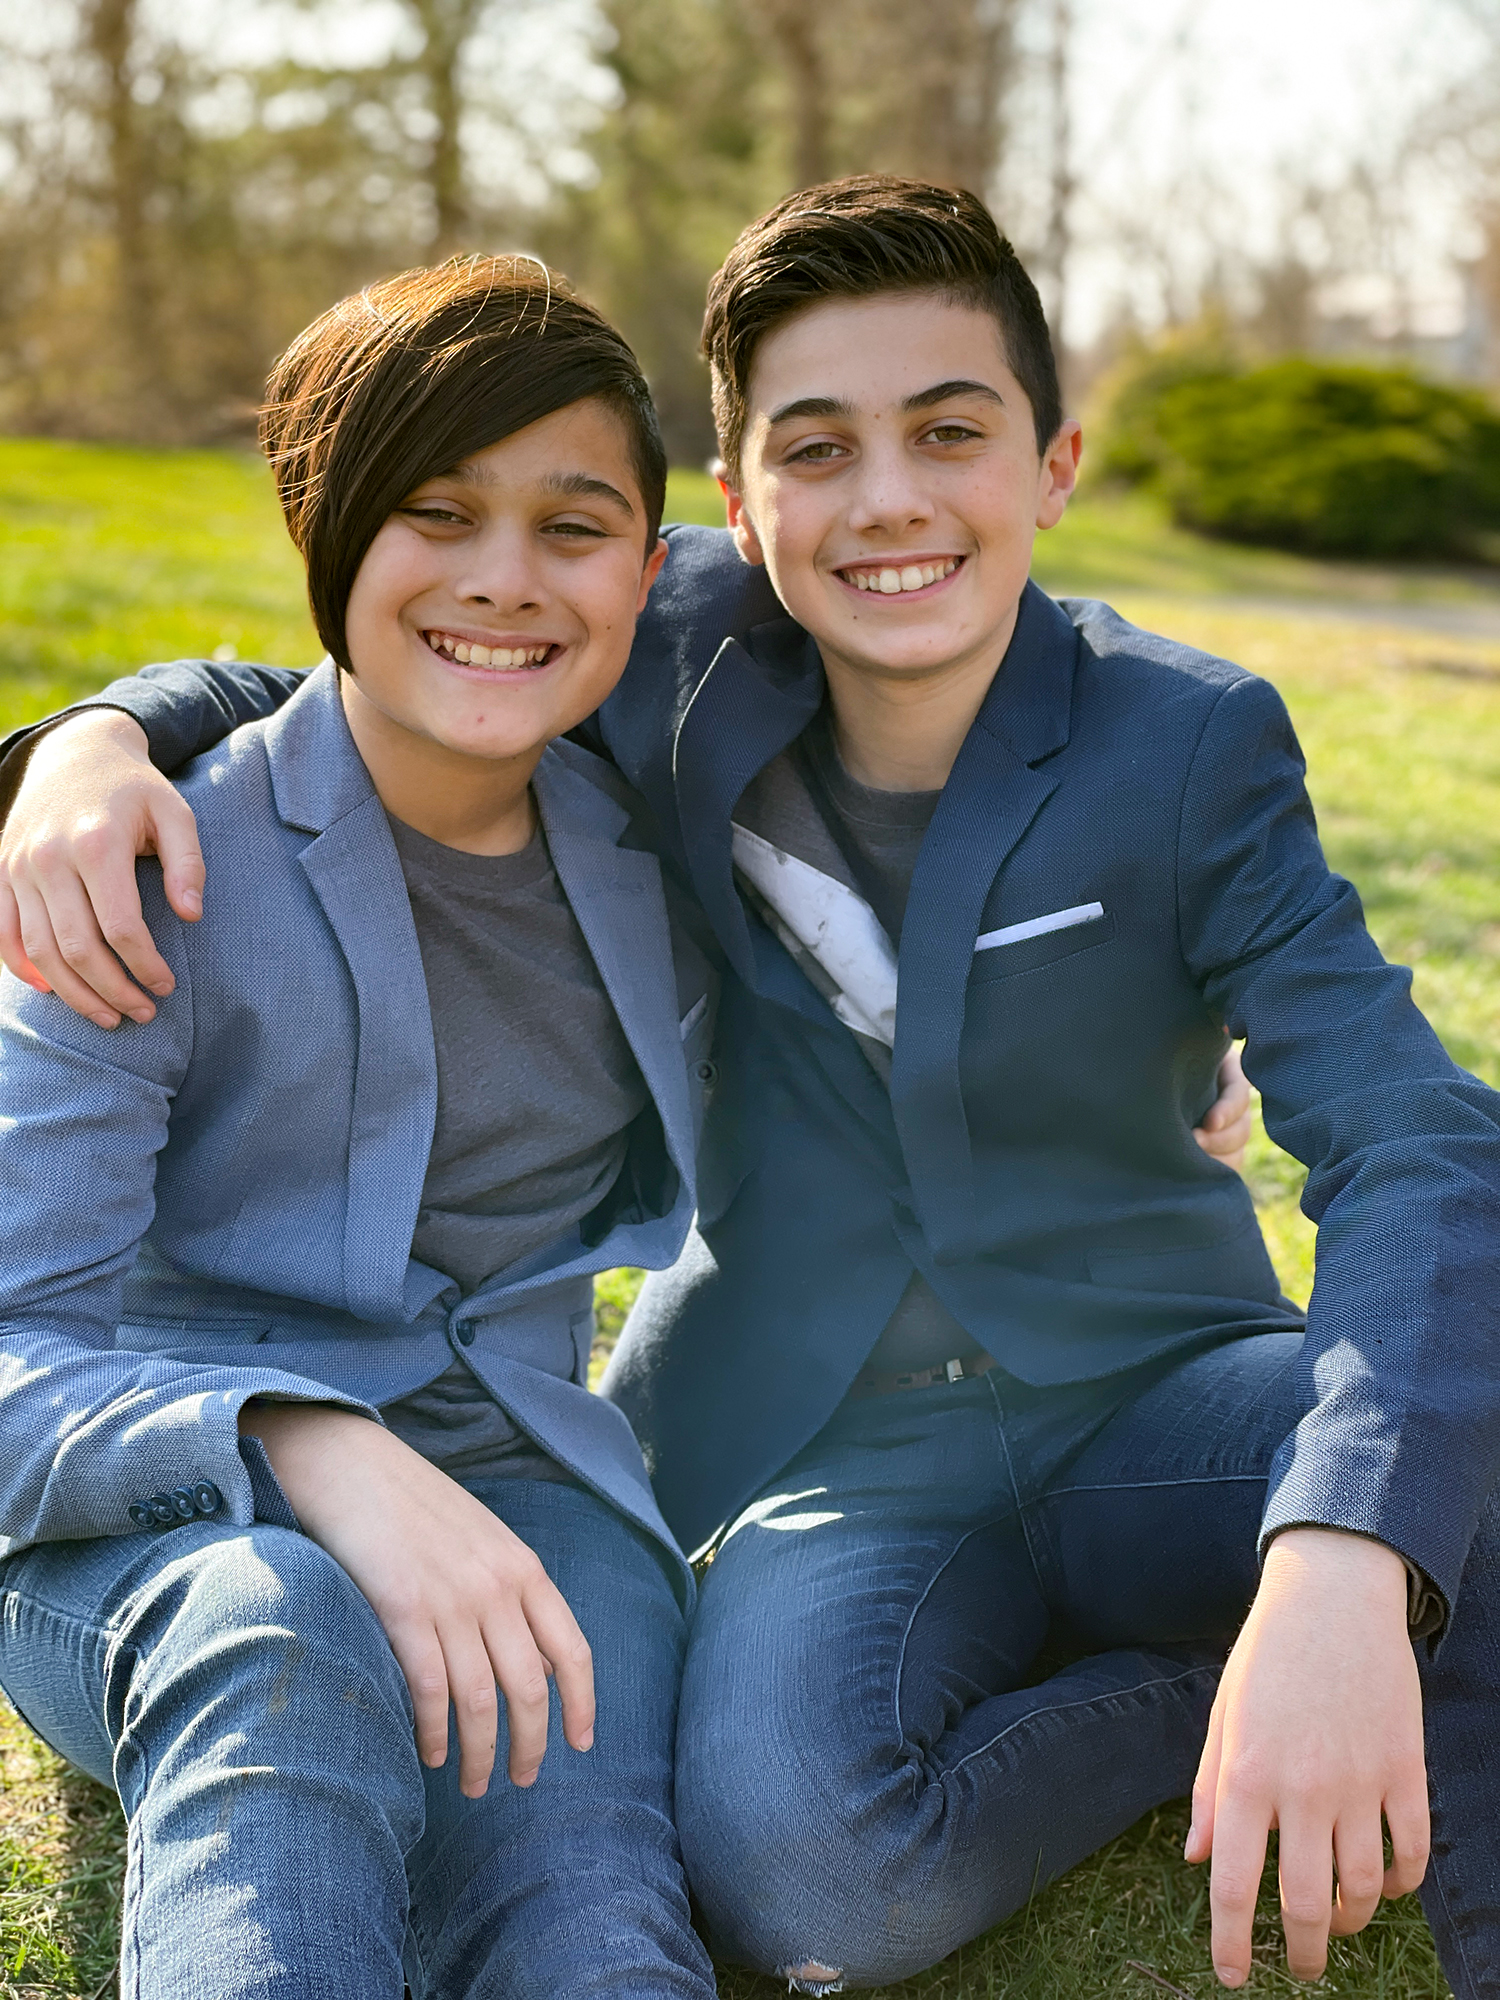 Two teenage brothers dressed in business suits sit next to each other. The older brother has his arm around the shoulder of the younger